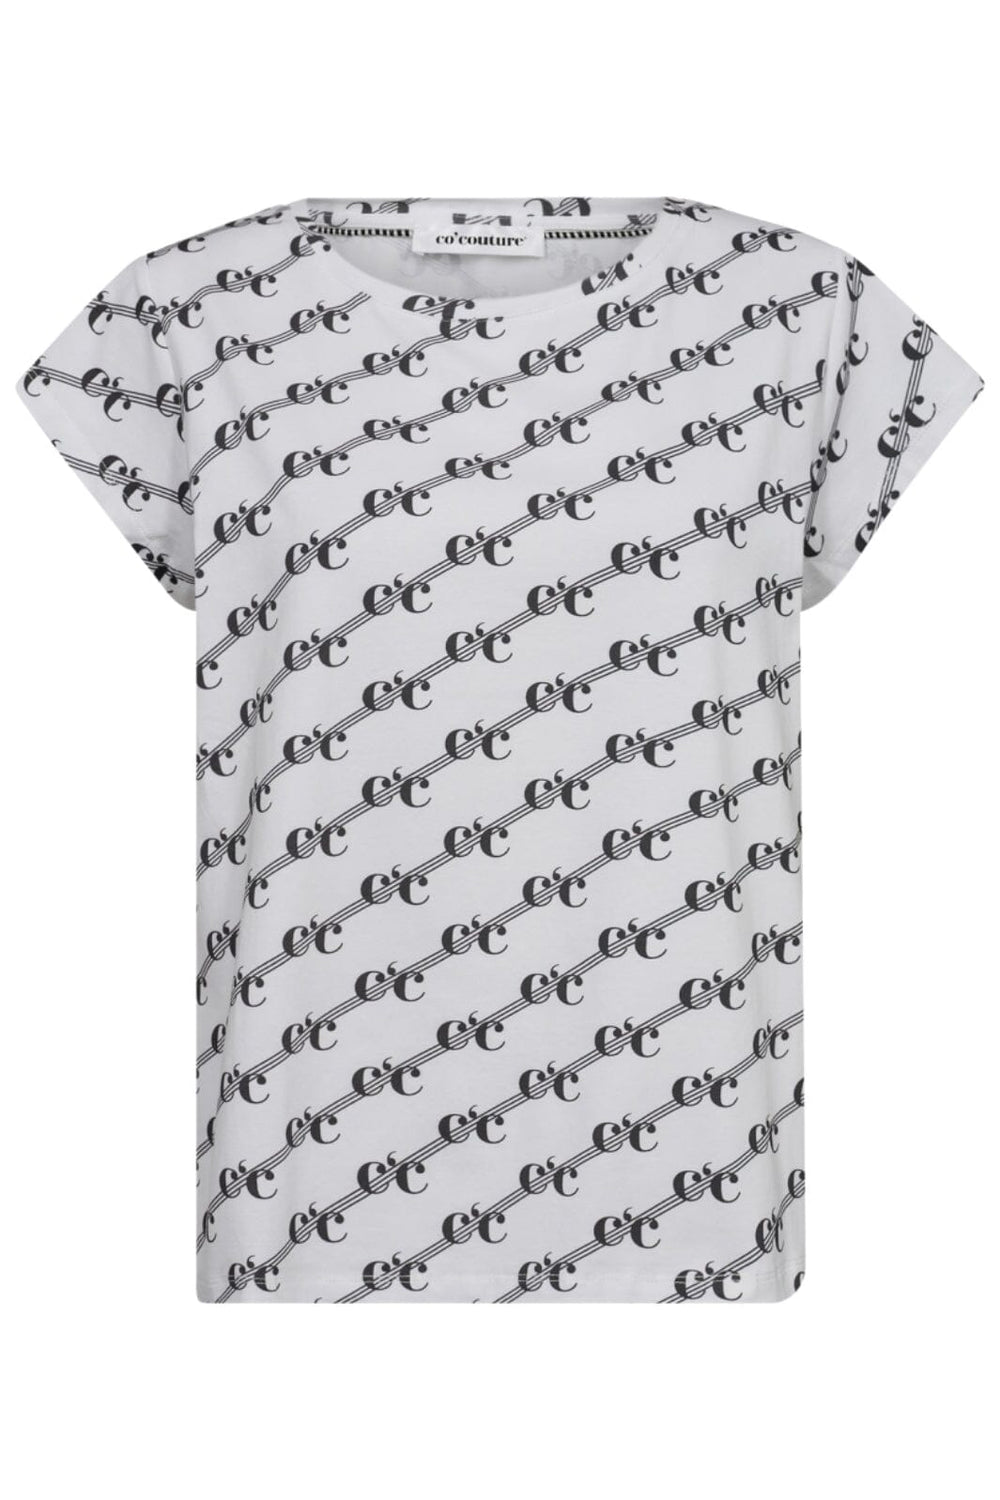 Co´couture - Logolinecc Ss Tee 33094 - 4000 White T-shirts 